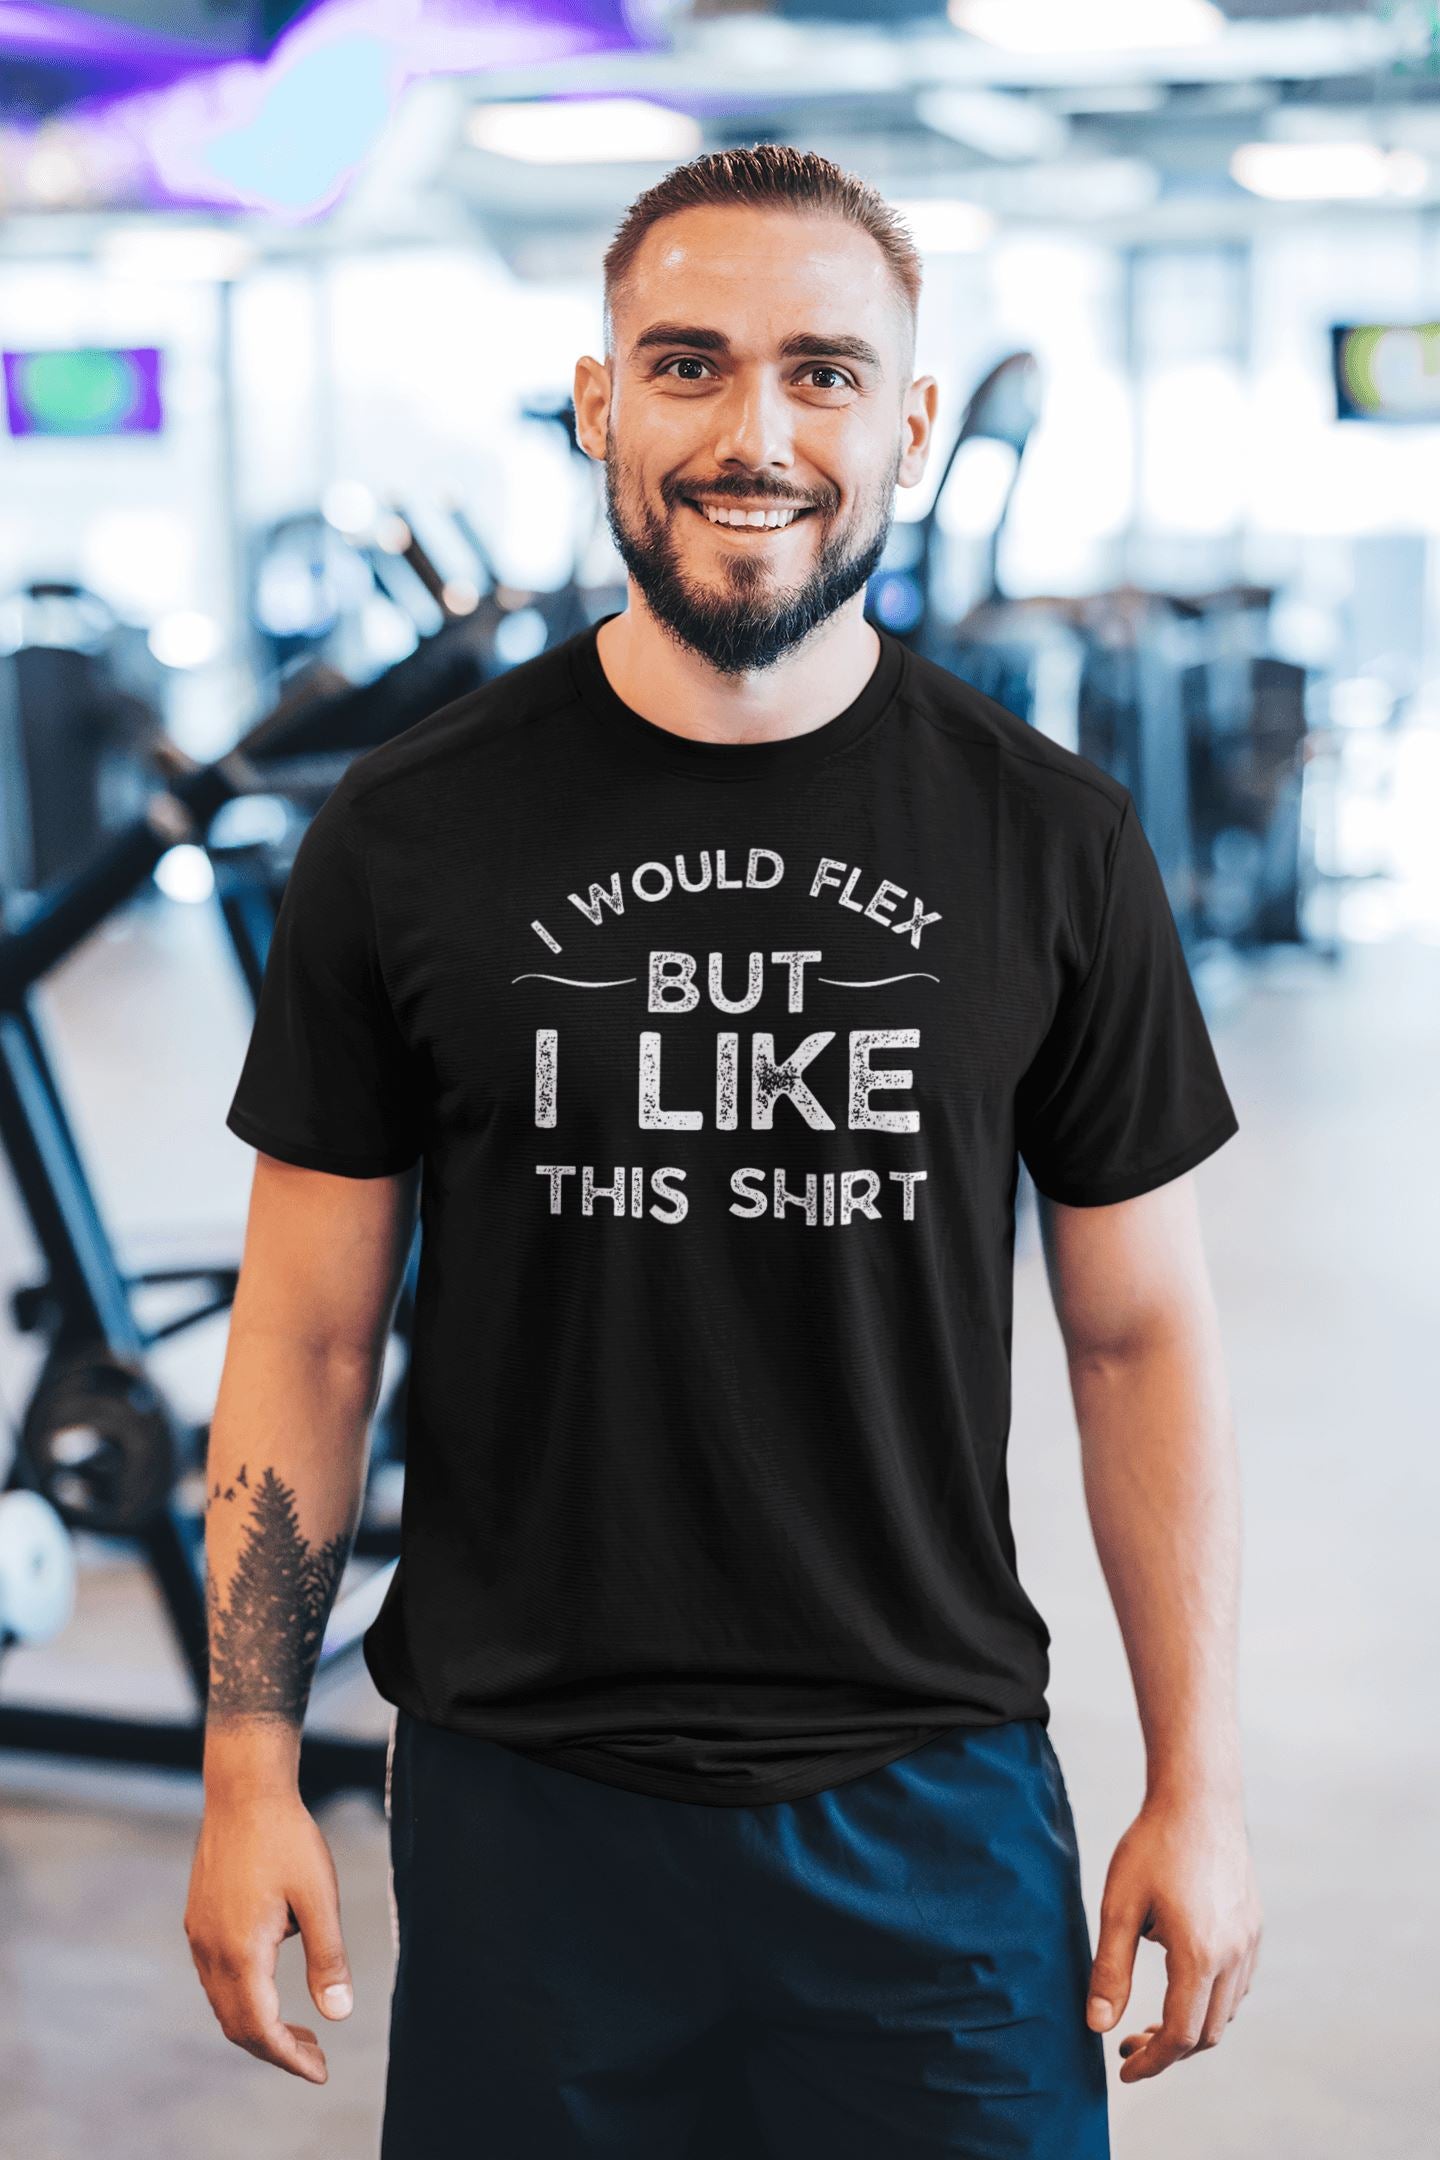 I Would Flex But I Like This Shirt Funny Black T Shirt for Men and Women - Catch My Drift India  black, clothing, funny, general, gym, made in india, shirt, t shirt, tshirt